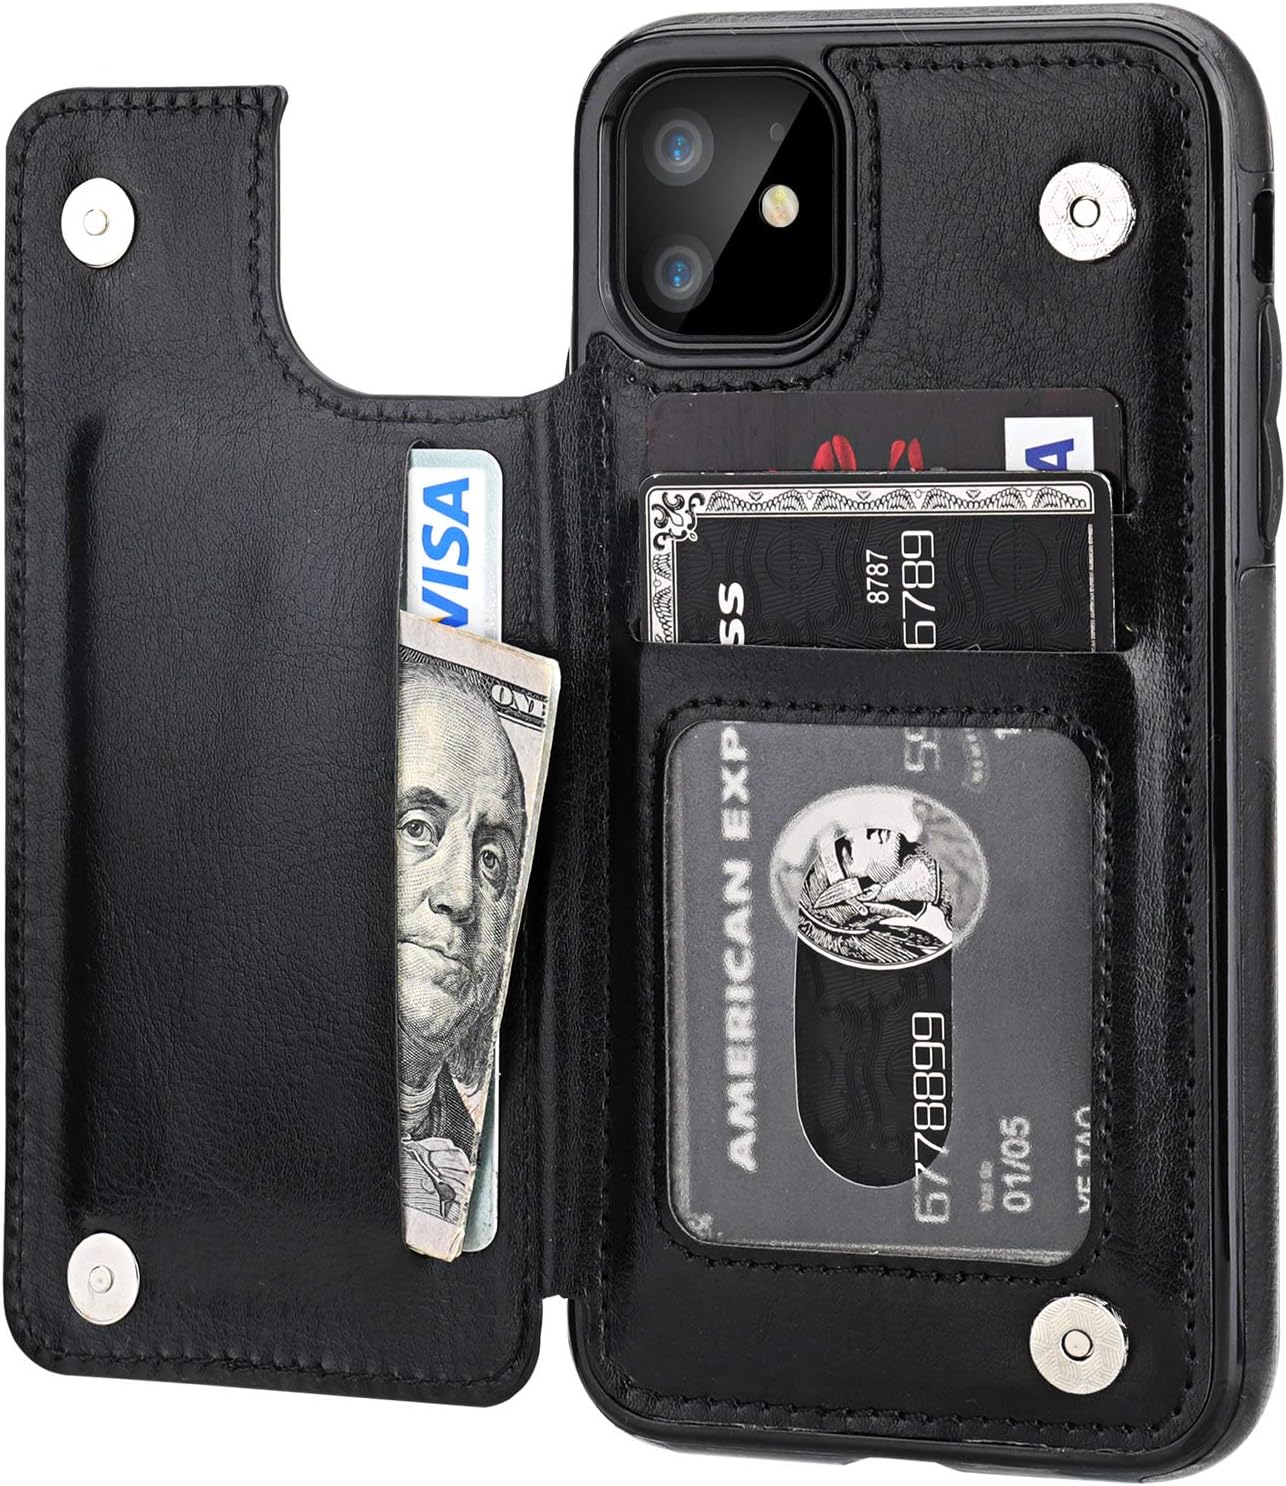 Product image of OT ONETOP iPhone 11 Wallet Case with Card Holder